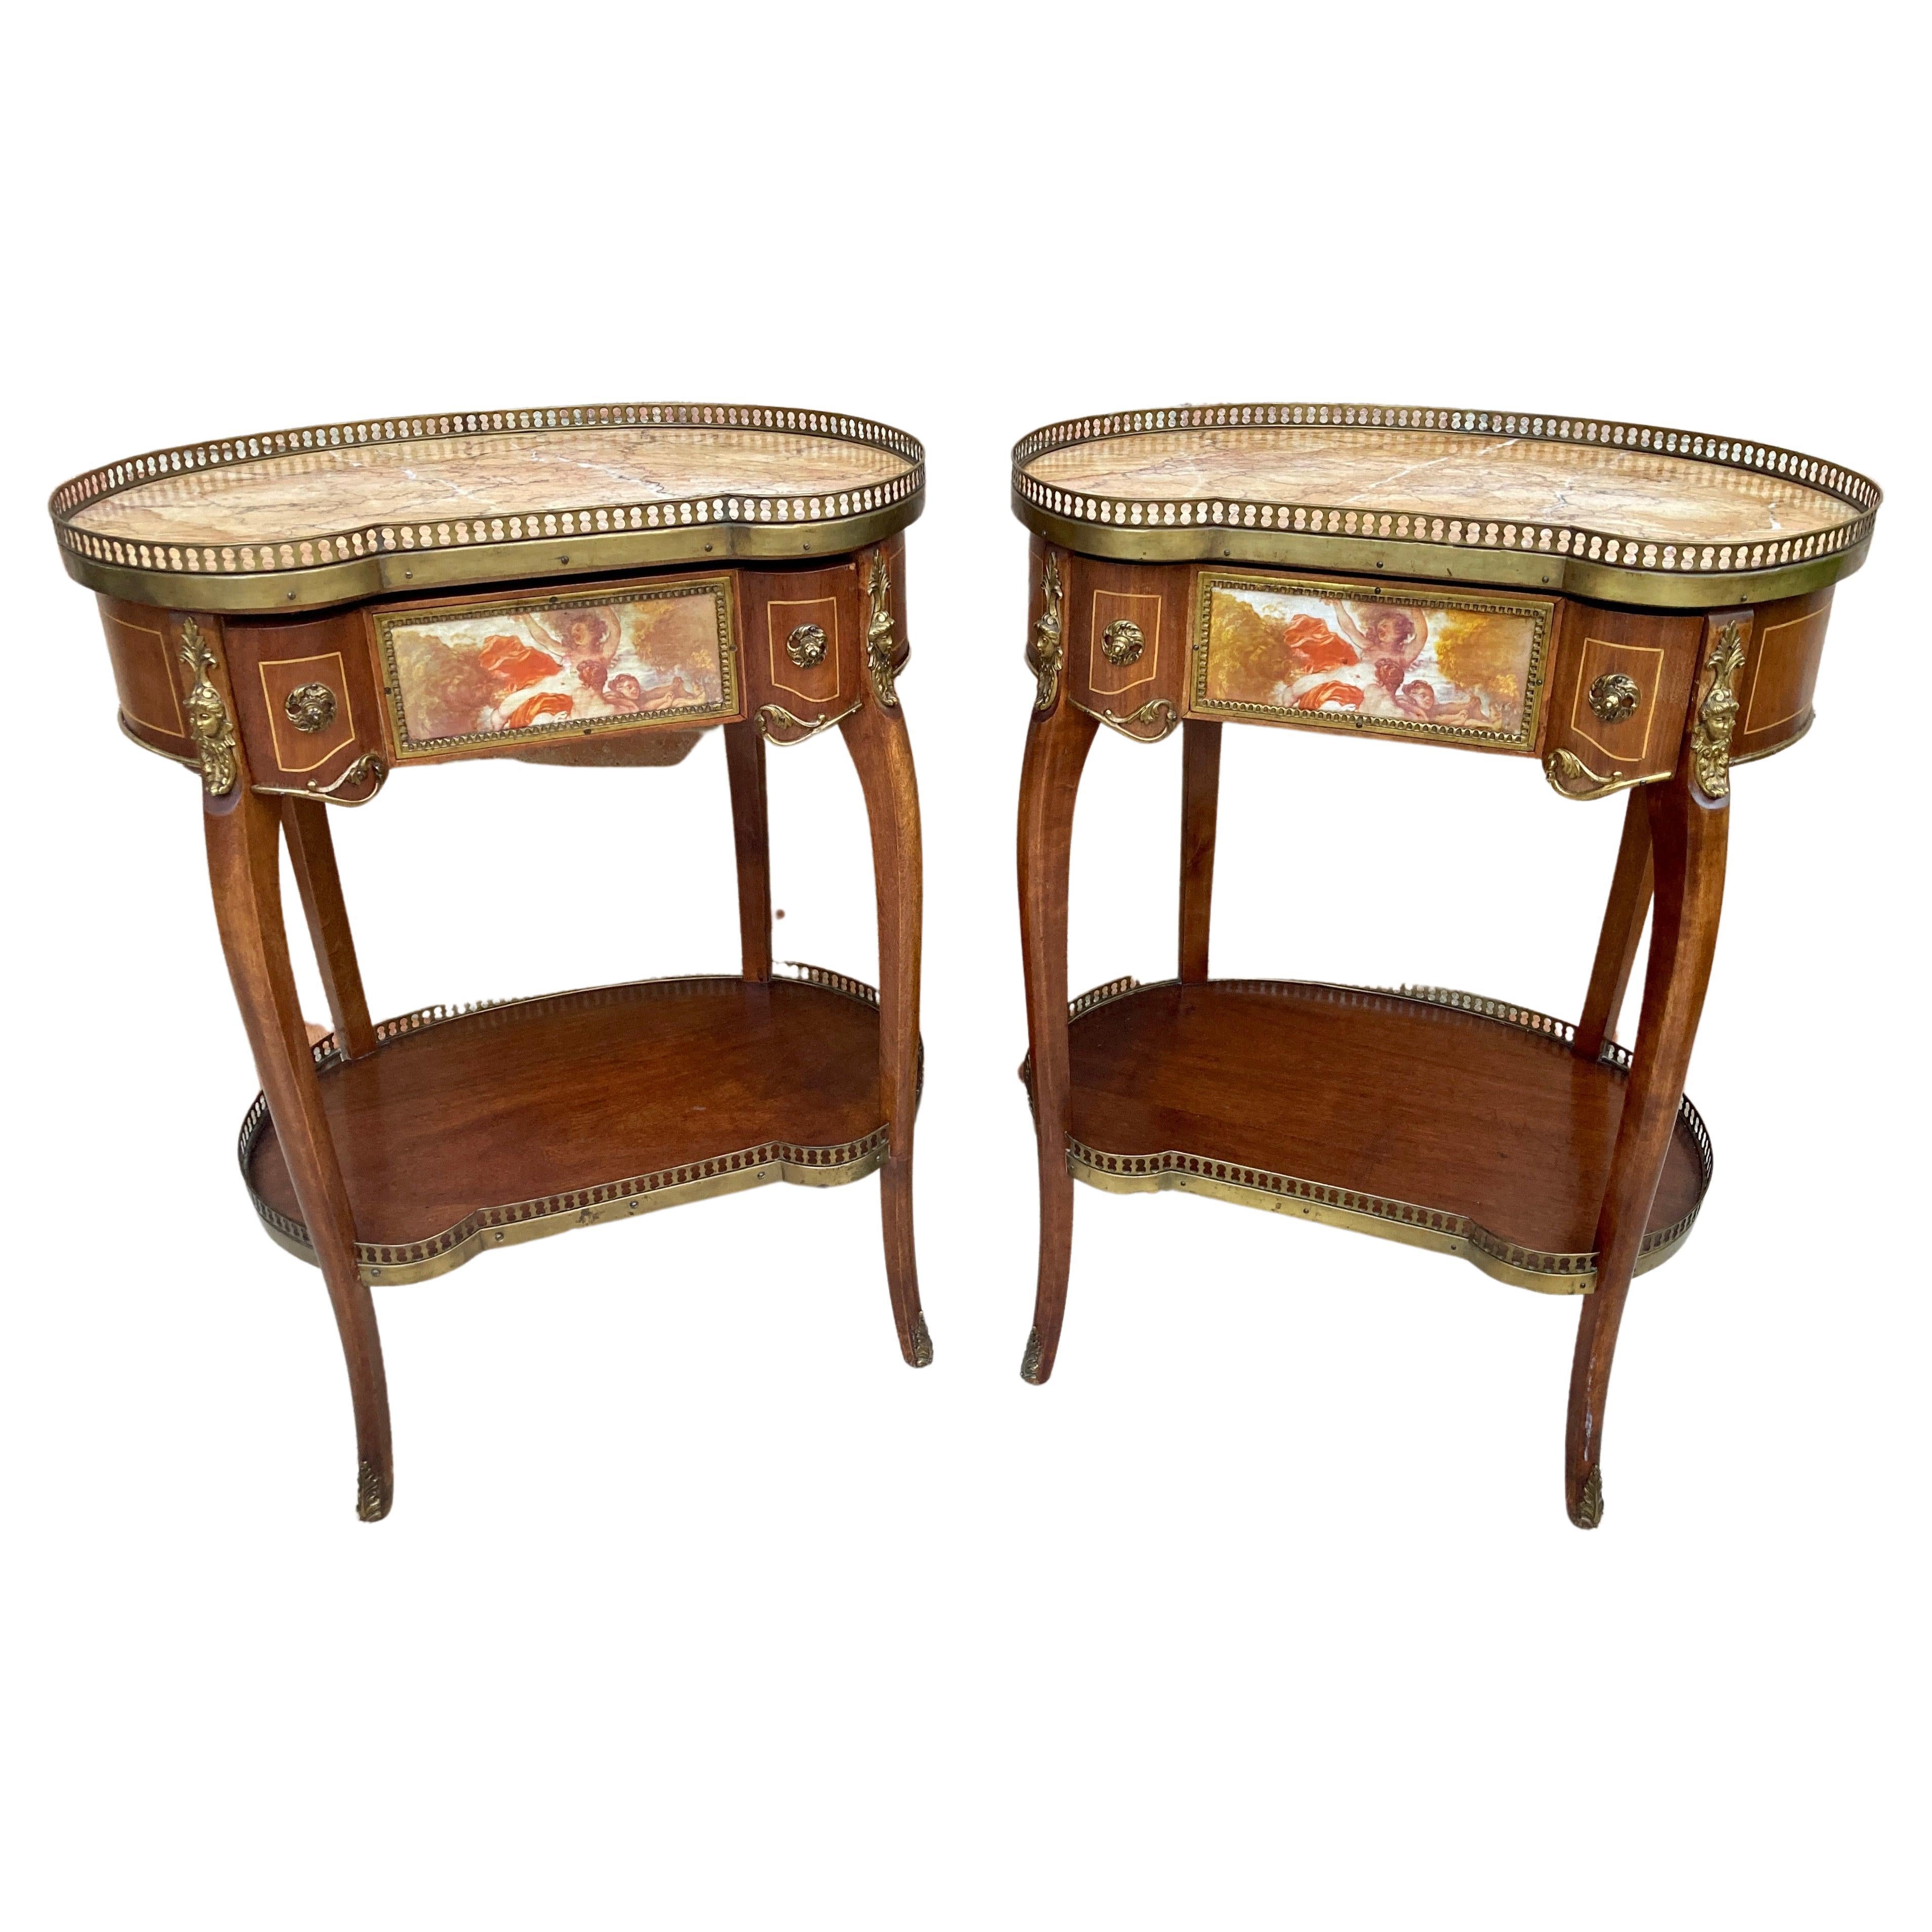 Carved Wood Kidney Shaped Bedside Tables with Bronze and Marble Top, Set of 2 For Sale